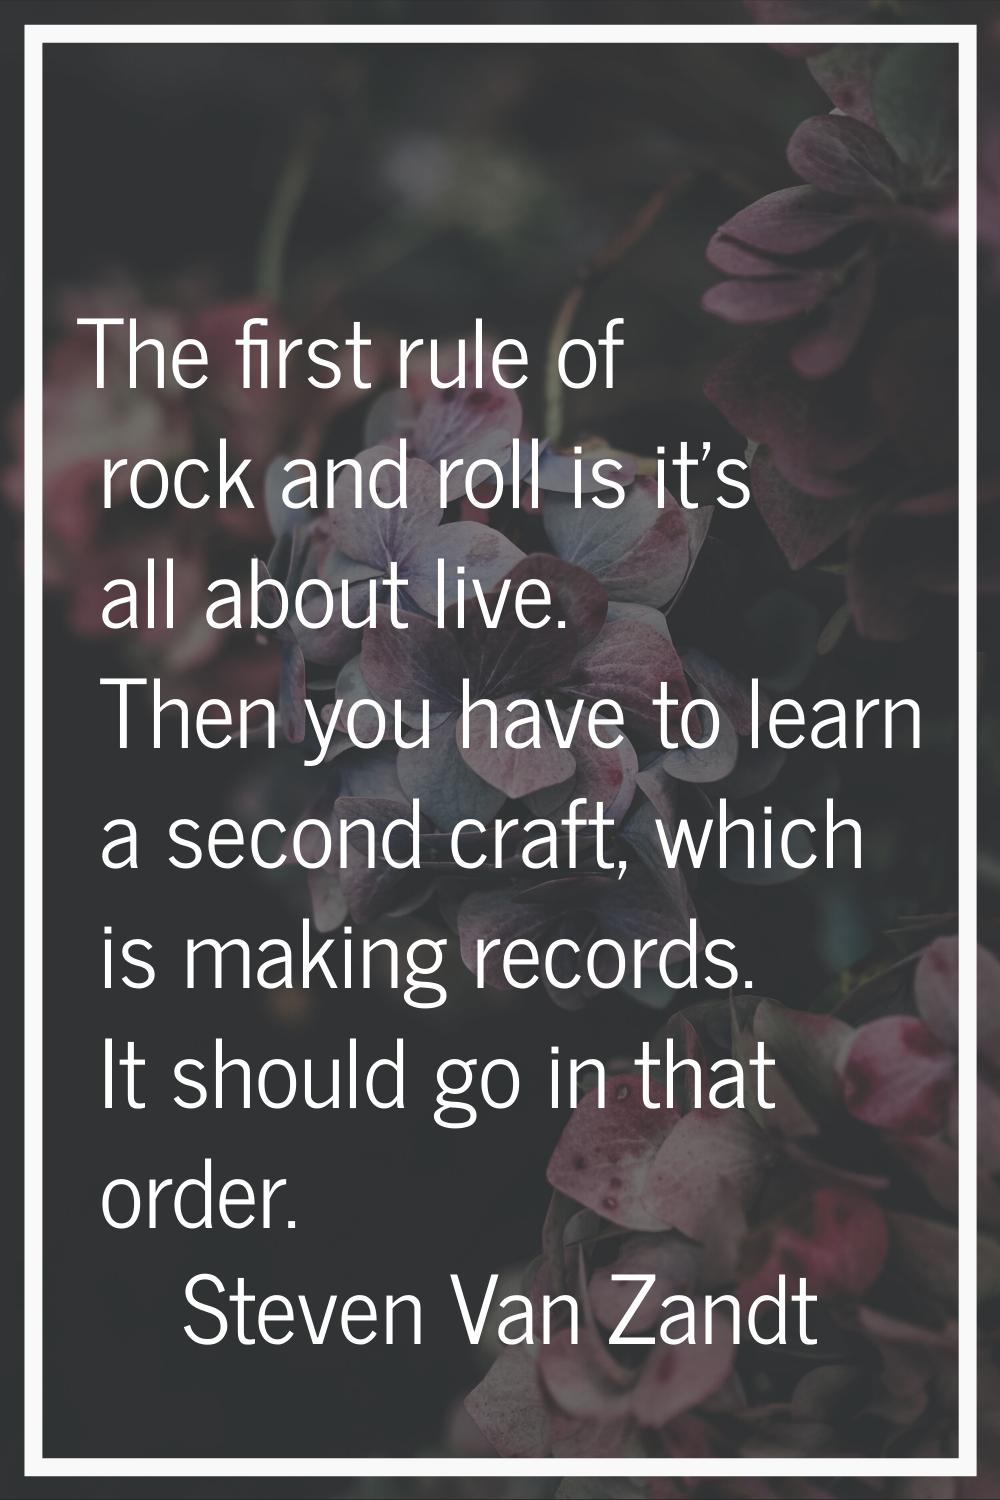 The first rule of rock and roll is it's all about live. Then you have to learn a second craft, whic